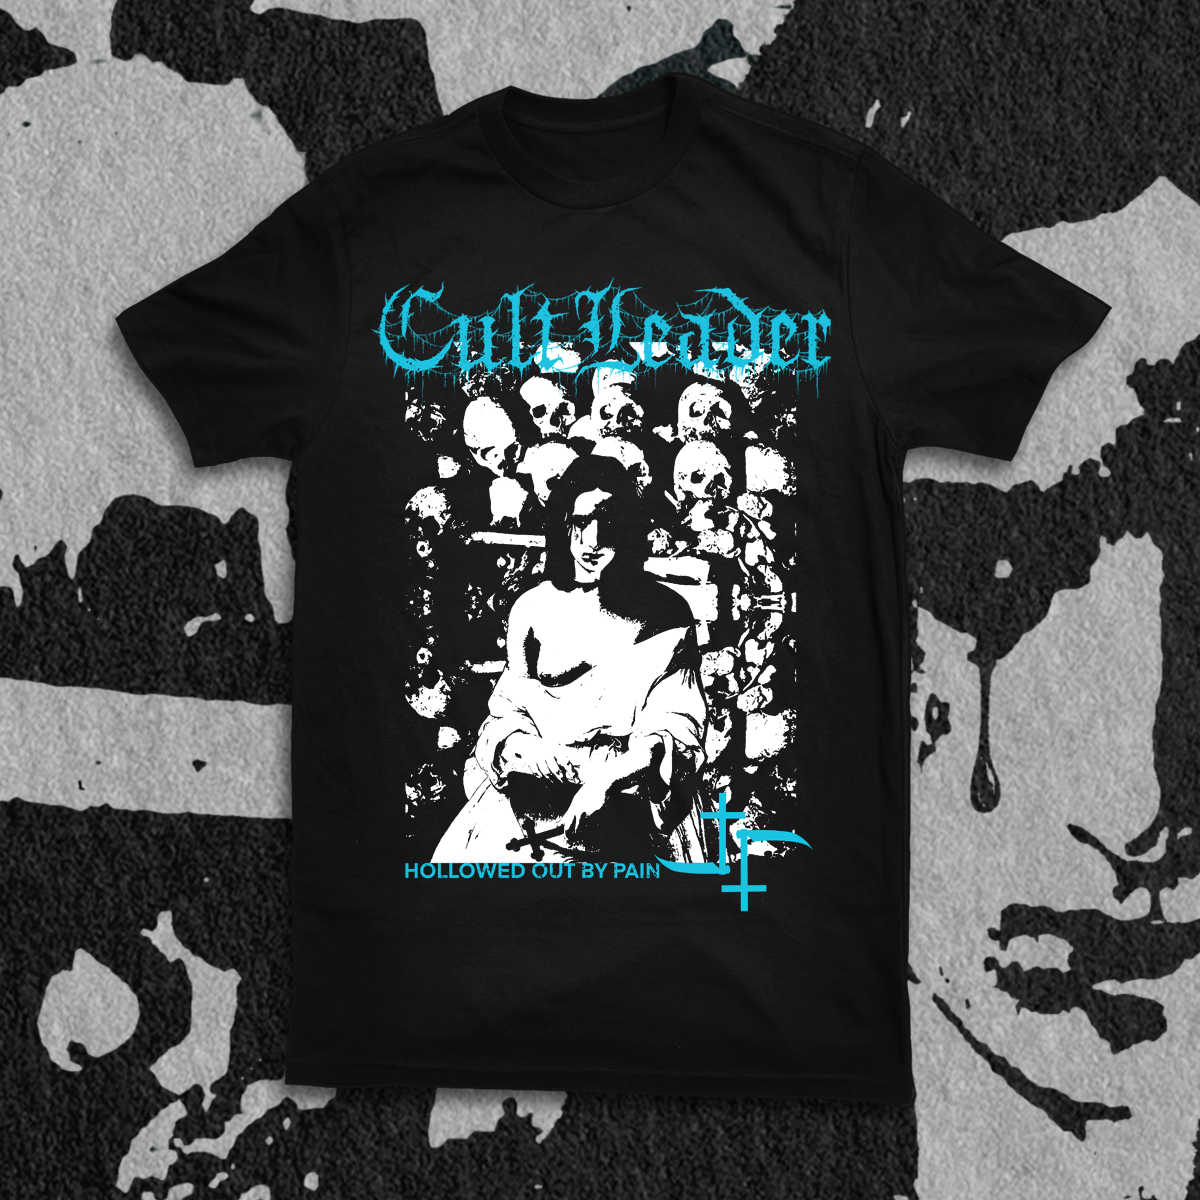 CULT LEADER "HOLLOWED OUT BY PAIN" SHIRT